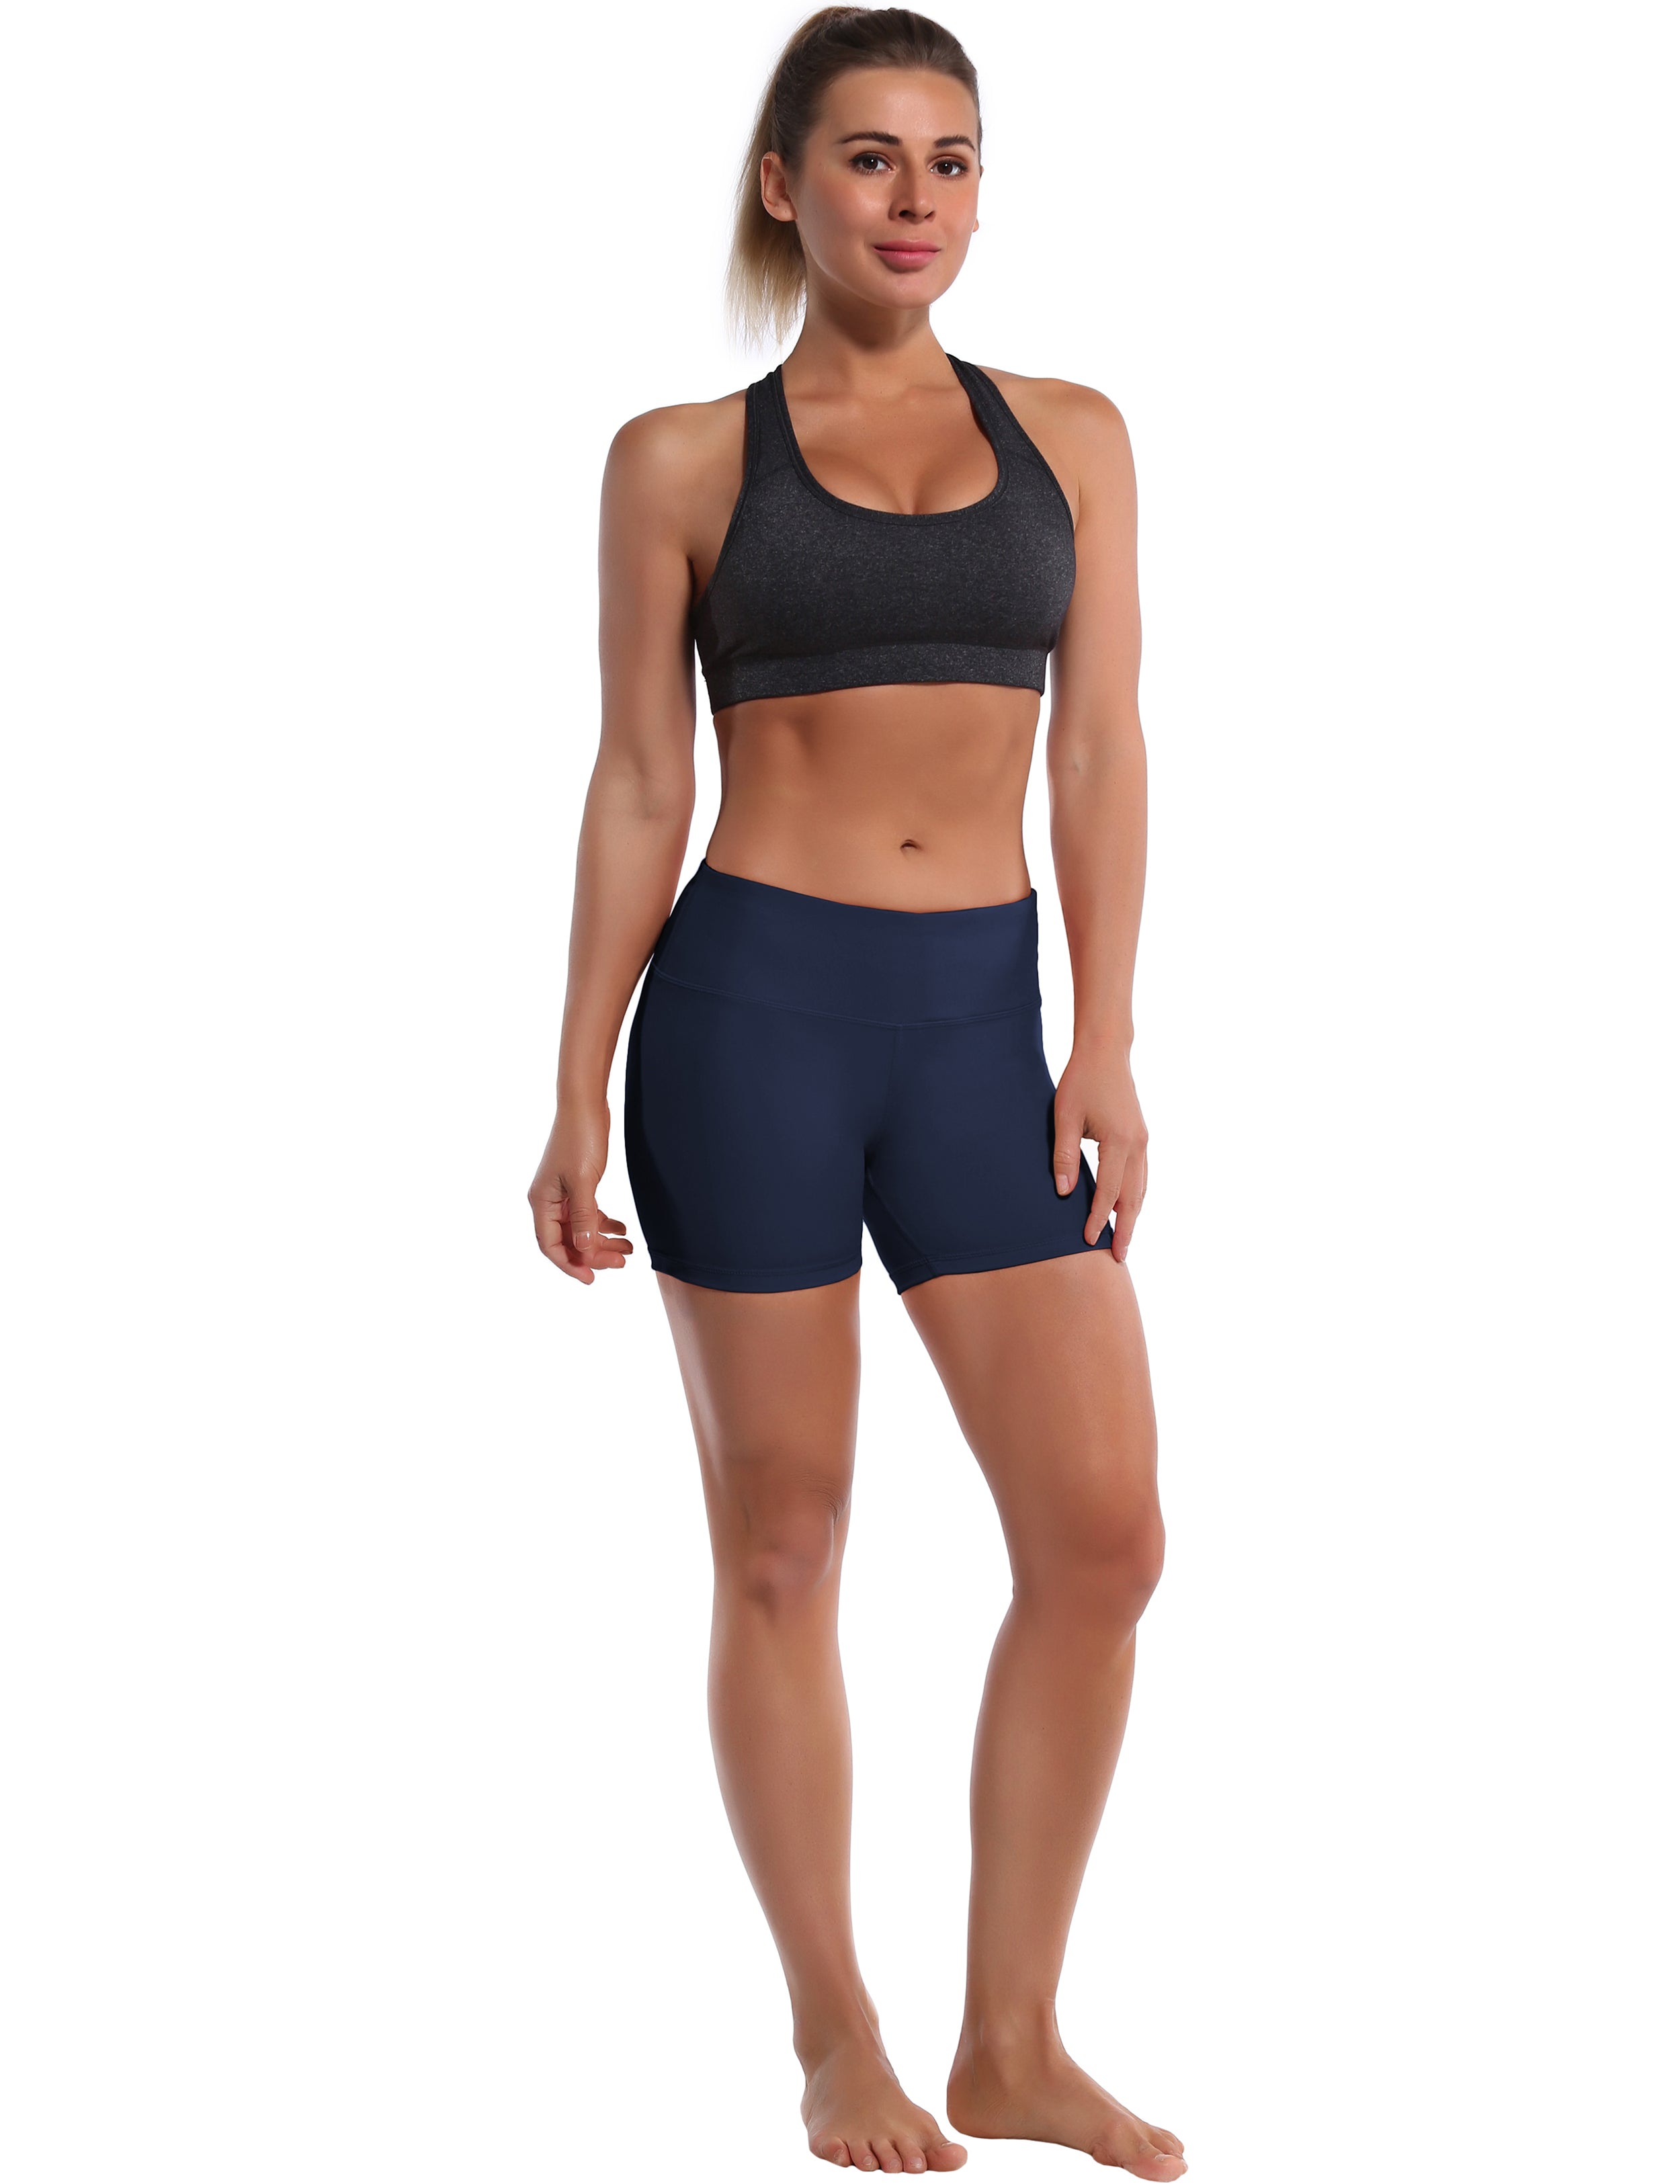 4" Biking Shorts darknavy Sleek, soft, smooth and totally comfortable: our newest style is here. Softest-ever fabric High elasticity High density 4-way stretch Fabric doesn't attract lint easily No see-through Moisture-wicking Machine wash 75% Nylon, 25% Spandex